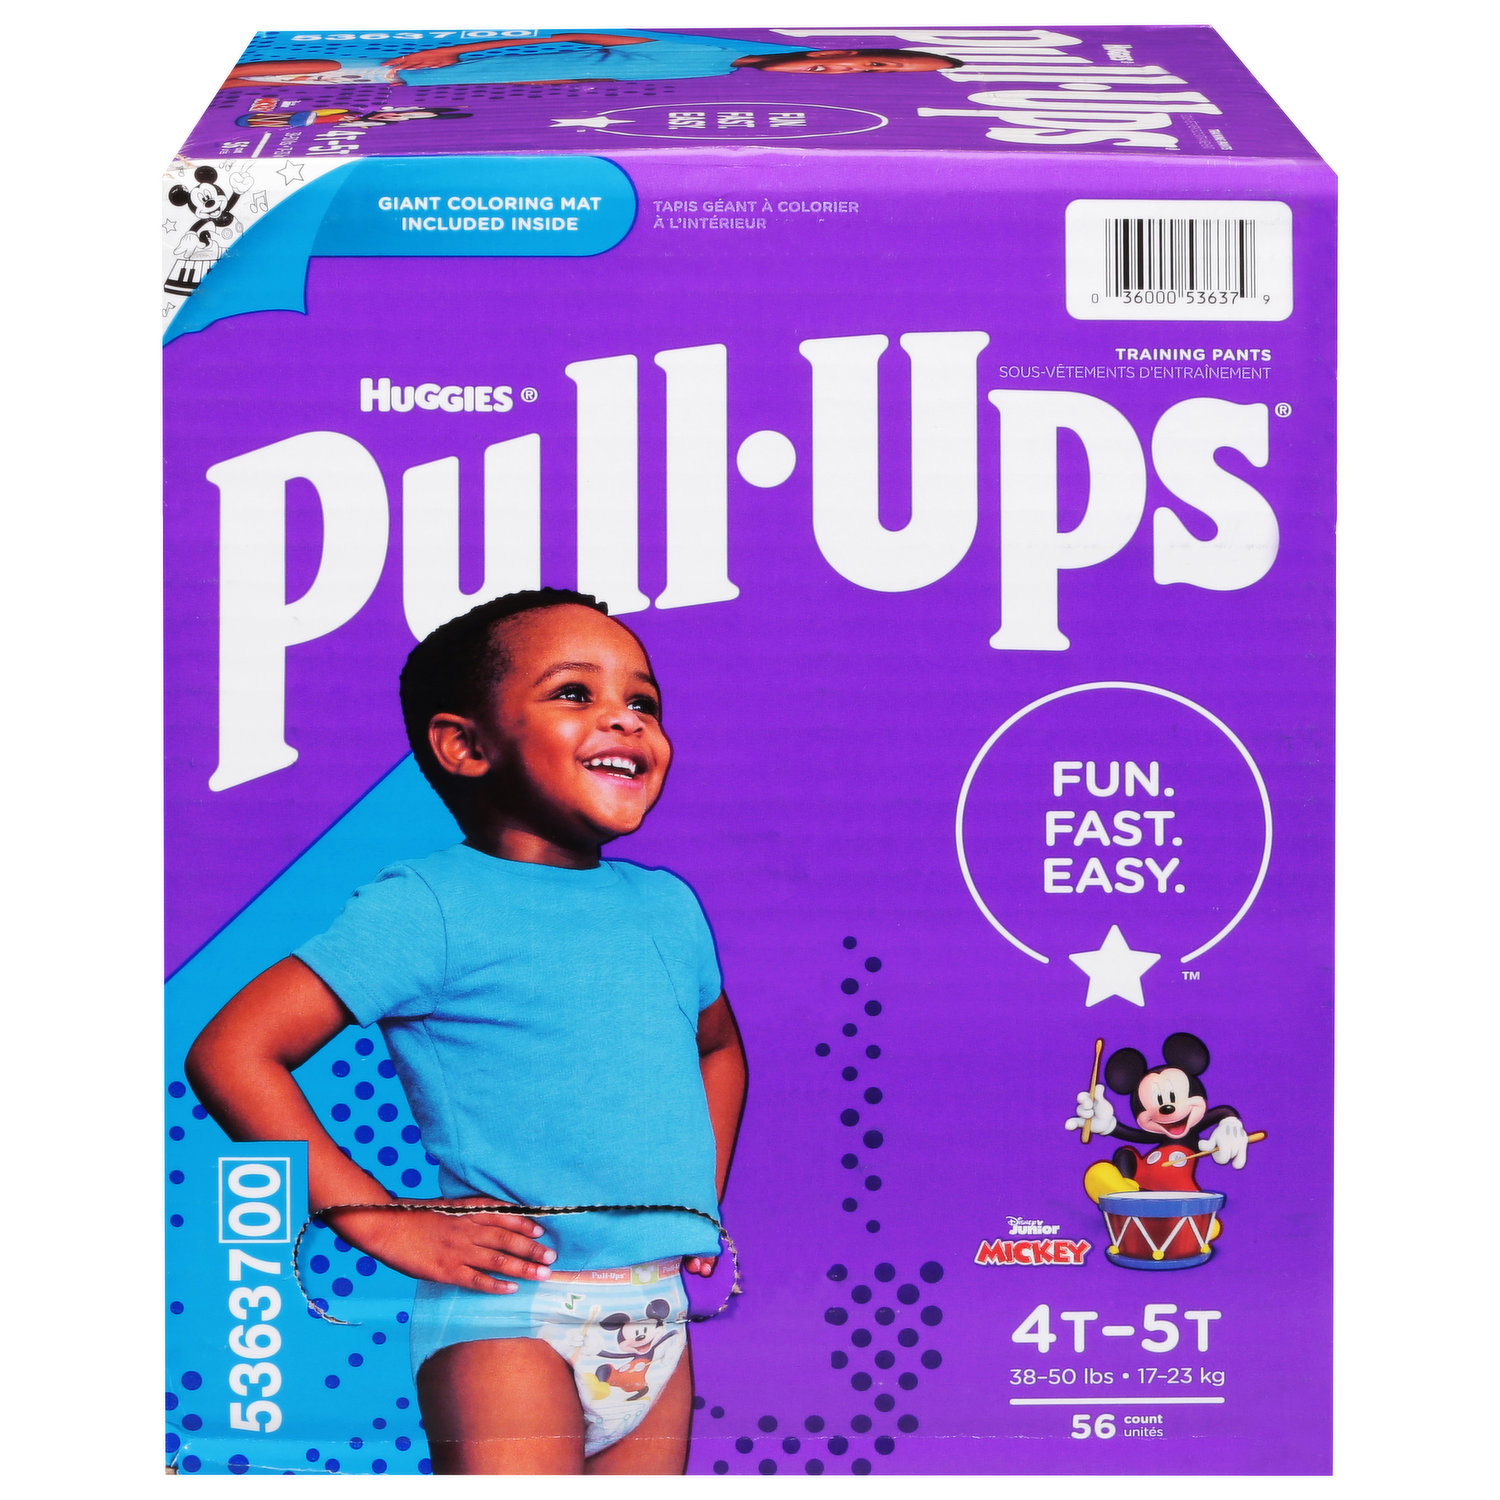 Huggies Boys Pull Ups Plus Disney Character Design Size 4T-5T Sealed Pack  of 34